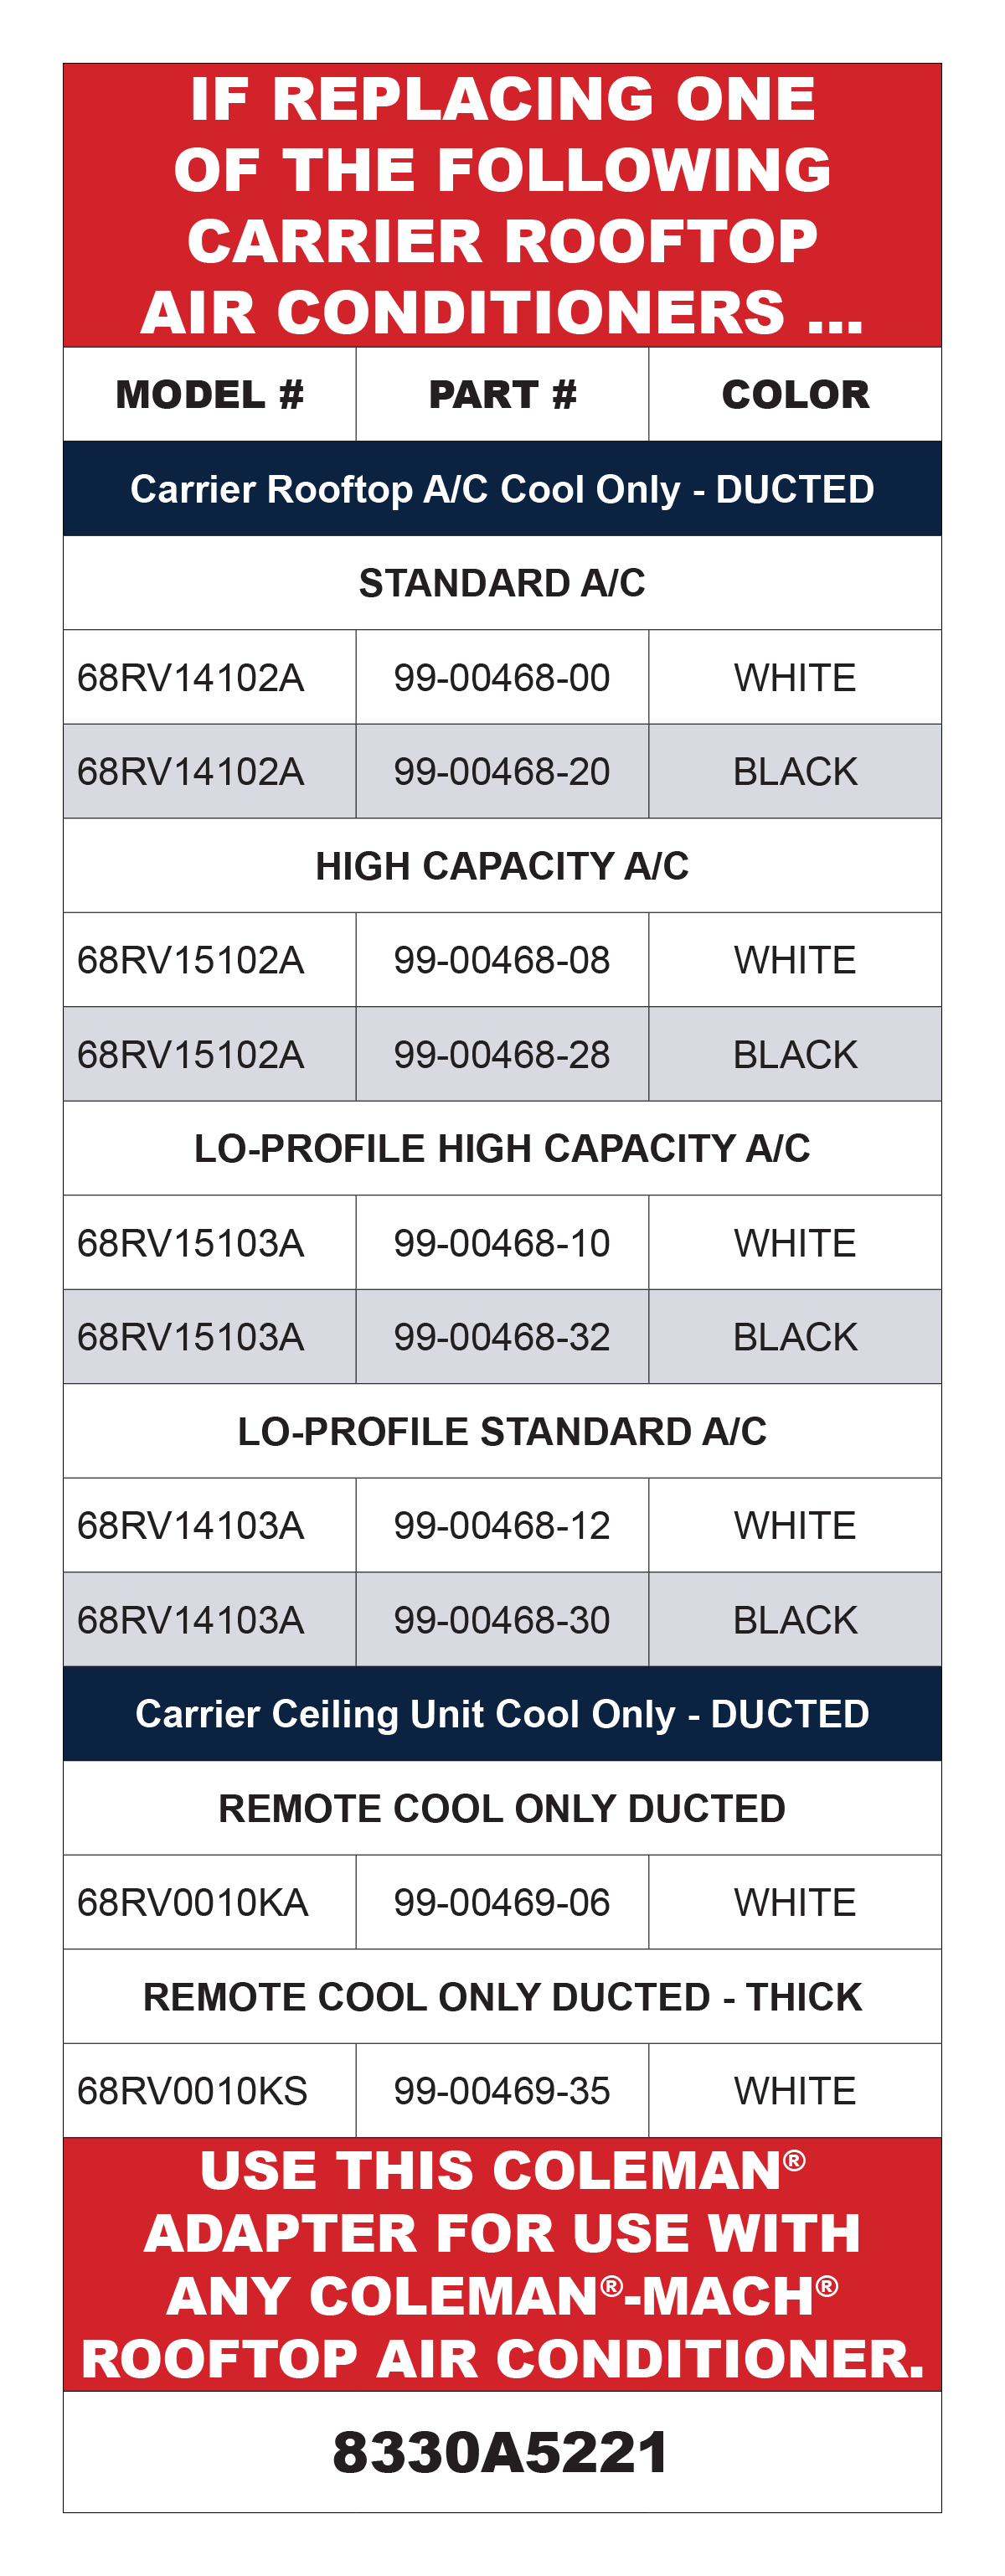 If replacing one of the following carrier rooftop air conditions